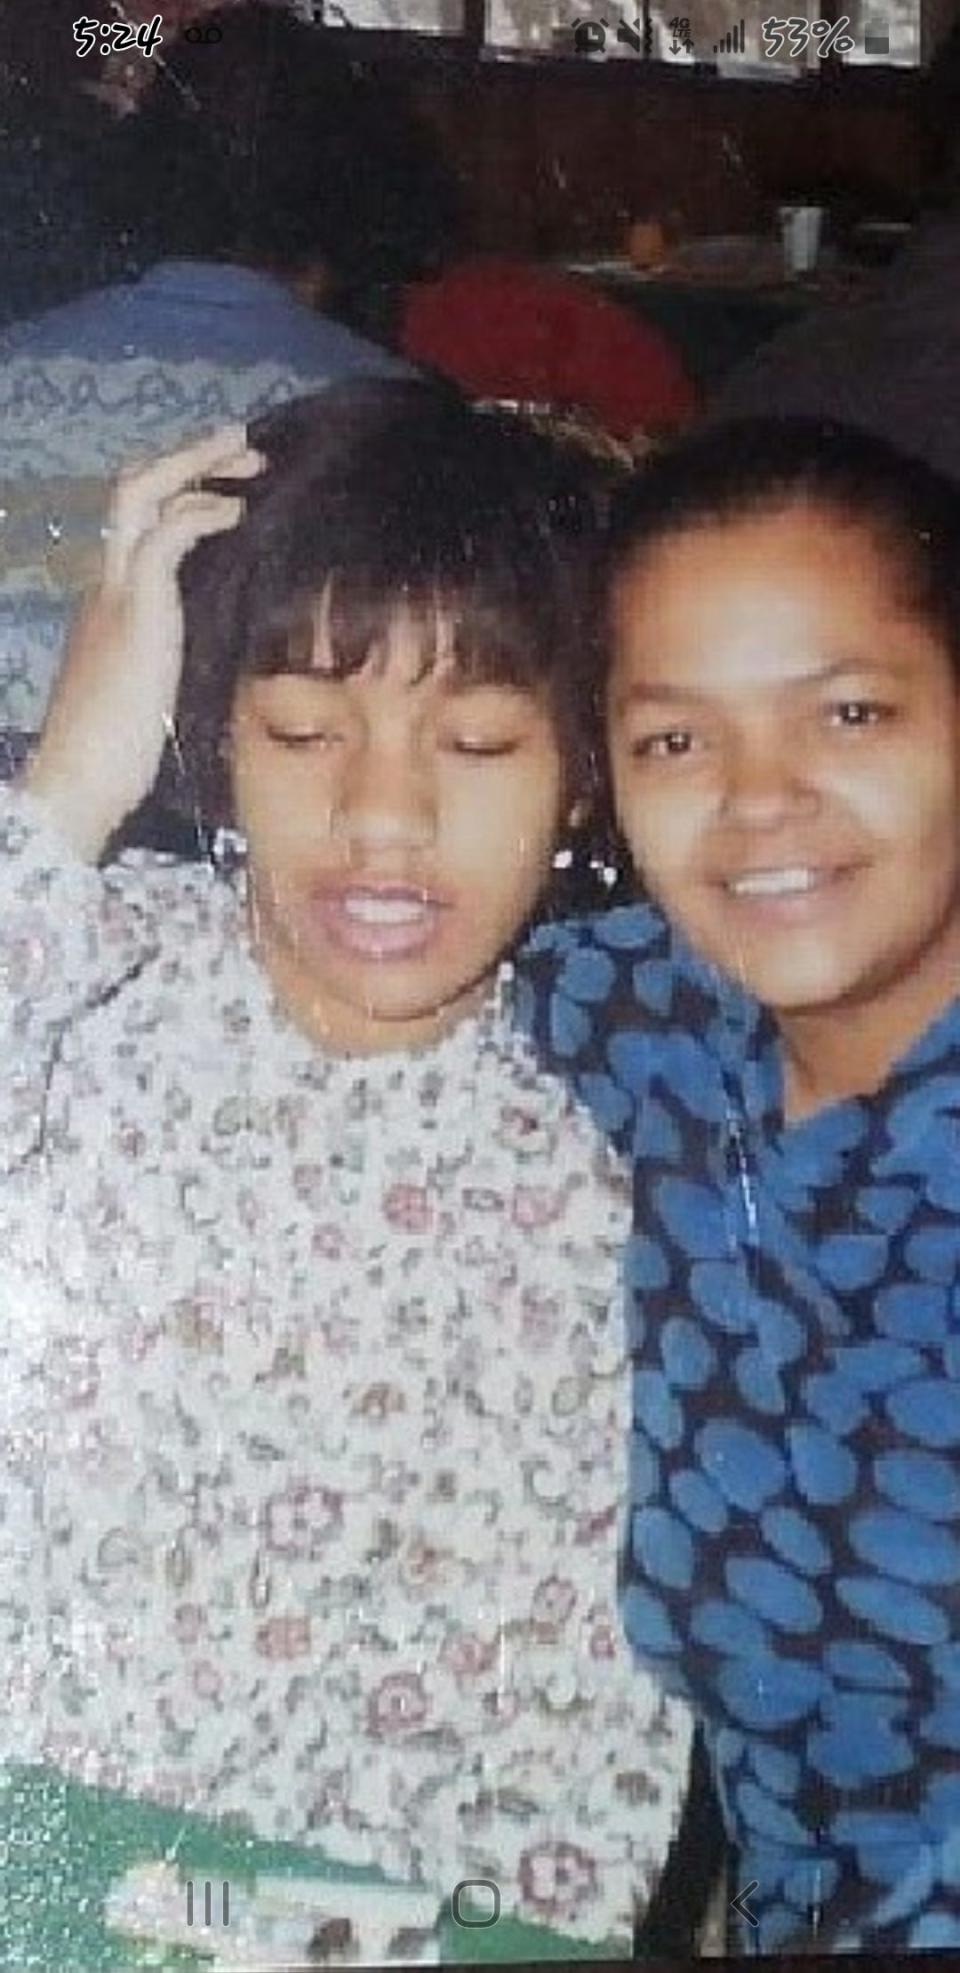 Michelle Dawson-Pass' daughter, Regina Dawson, was 17 when her mother died in November 1996. This picture of the two of them is from about a year before Michelle's death. Regina described her mother as a funny, God-fearing woman.